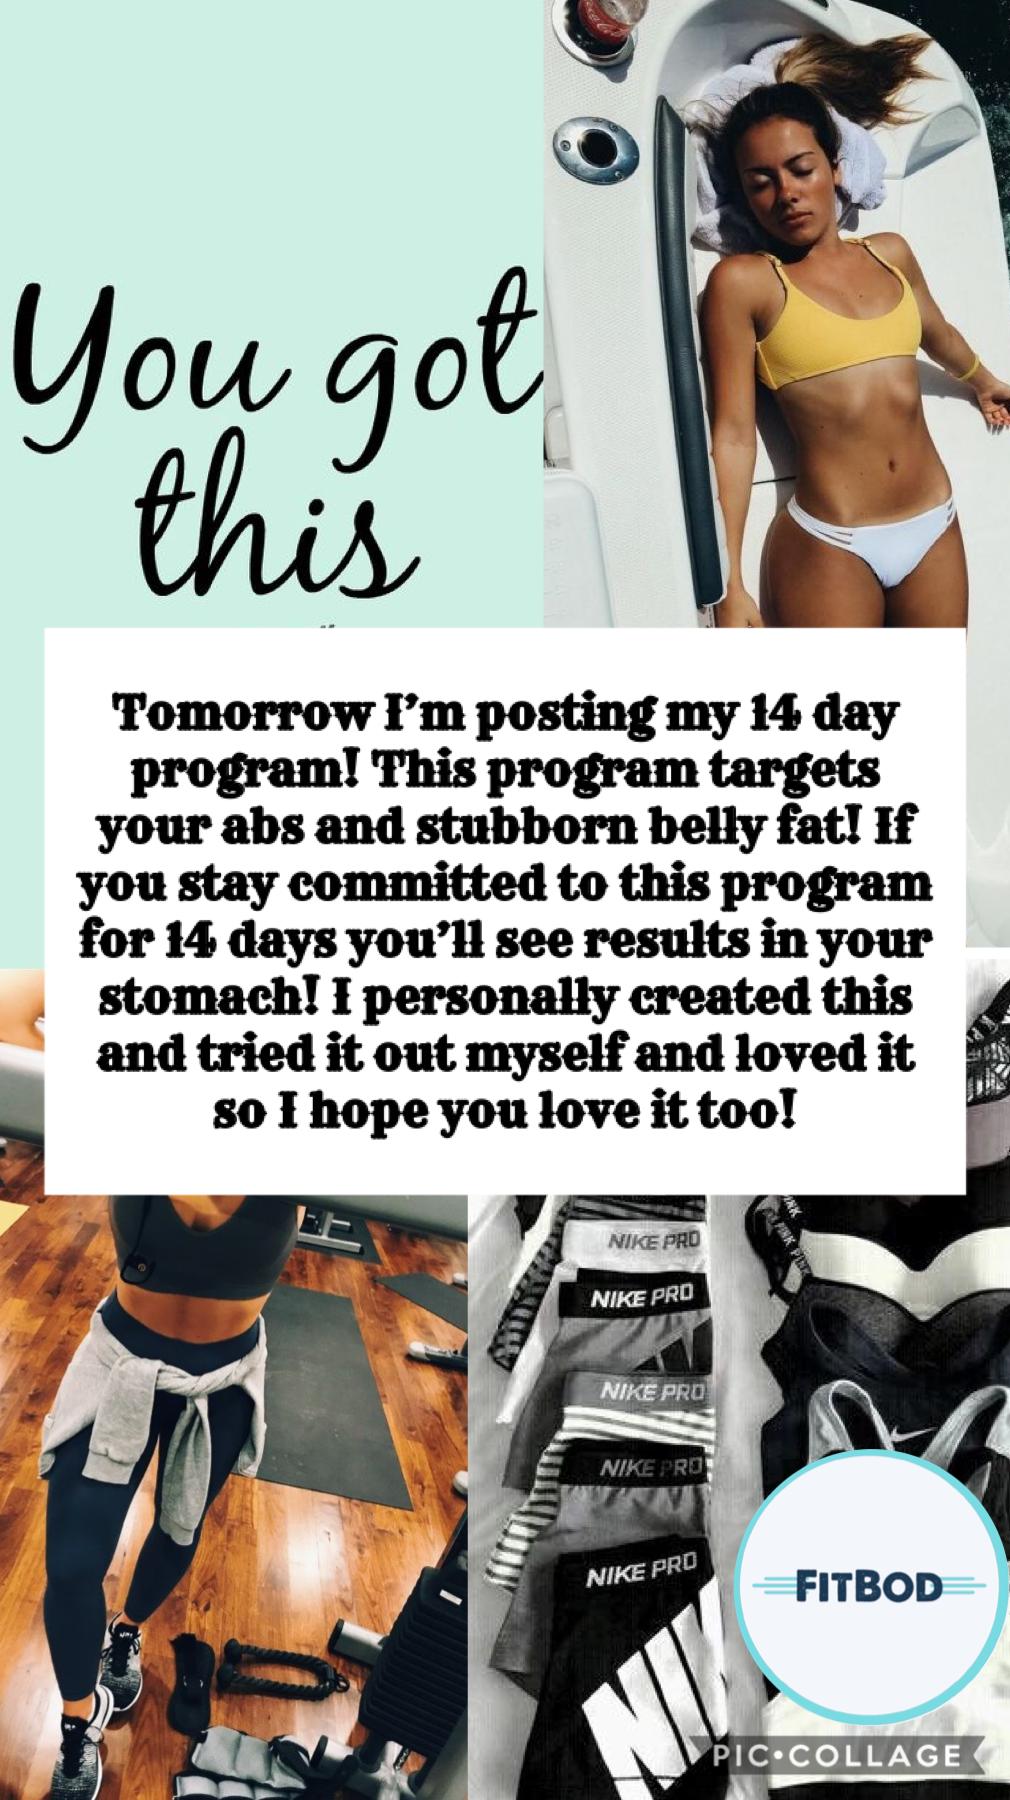 Hope you’ll try it out! If you’re okay with sharing your results I would love to post results!